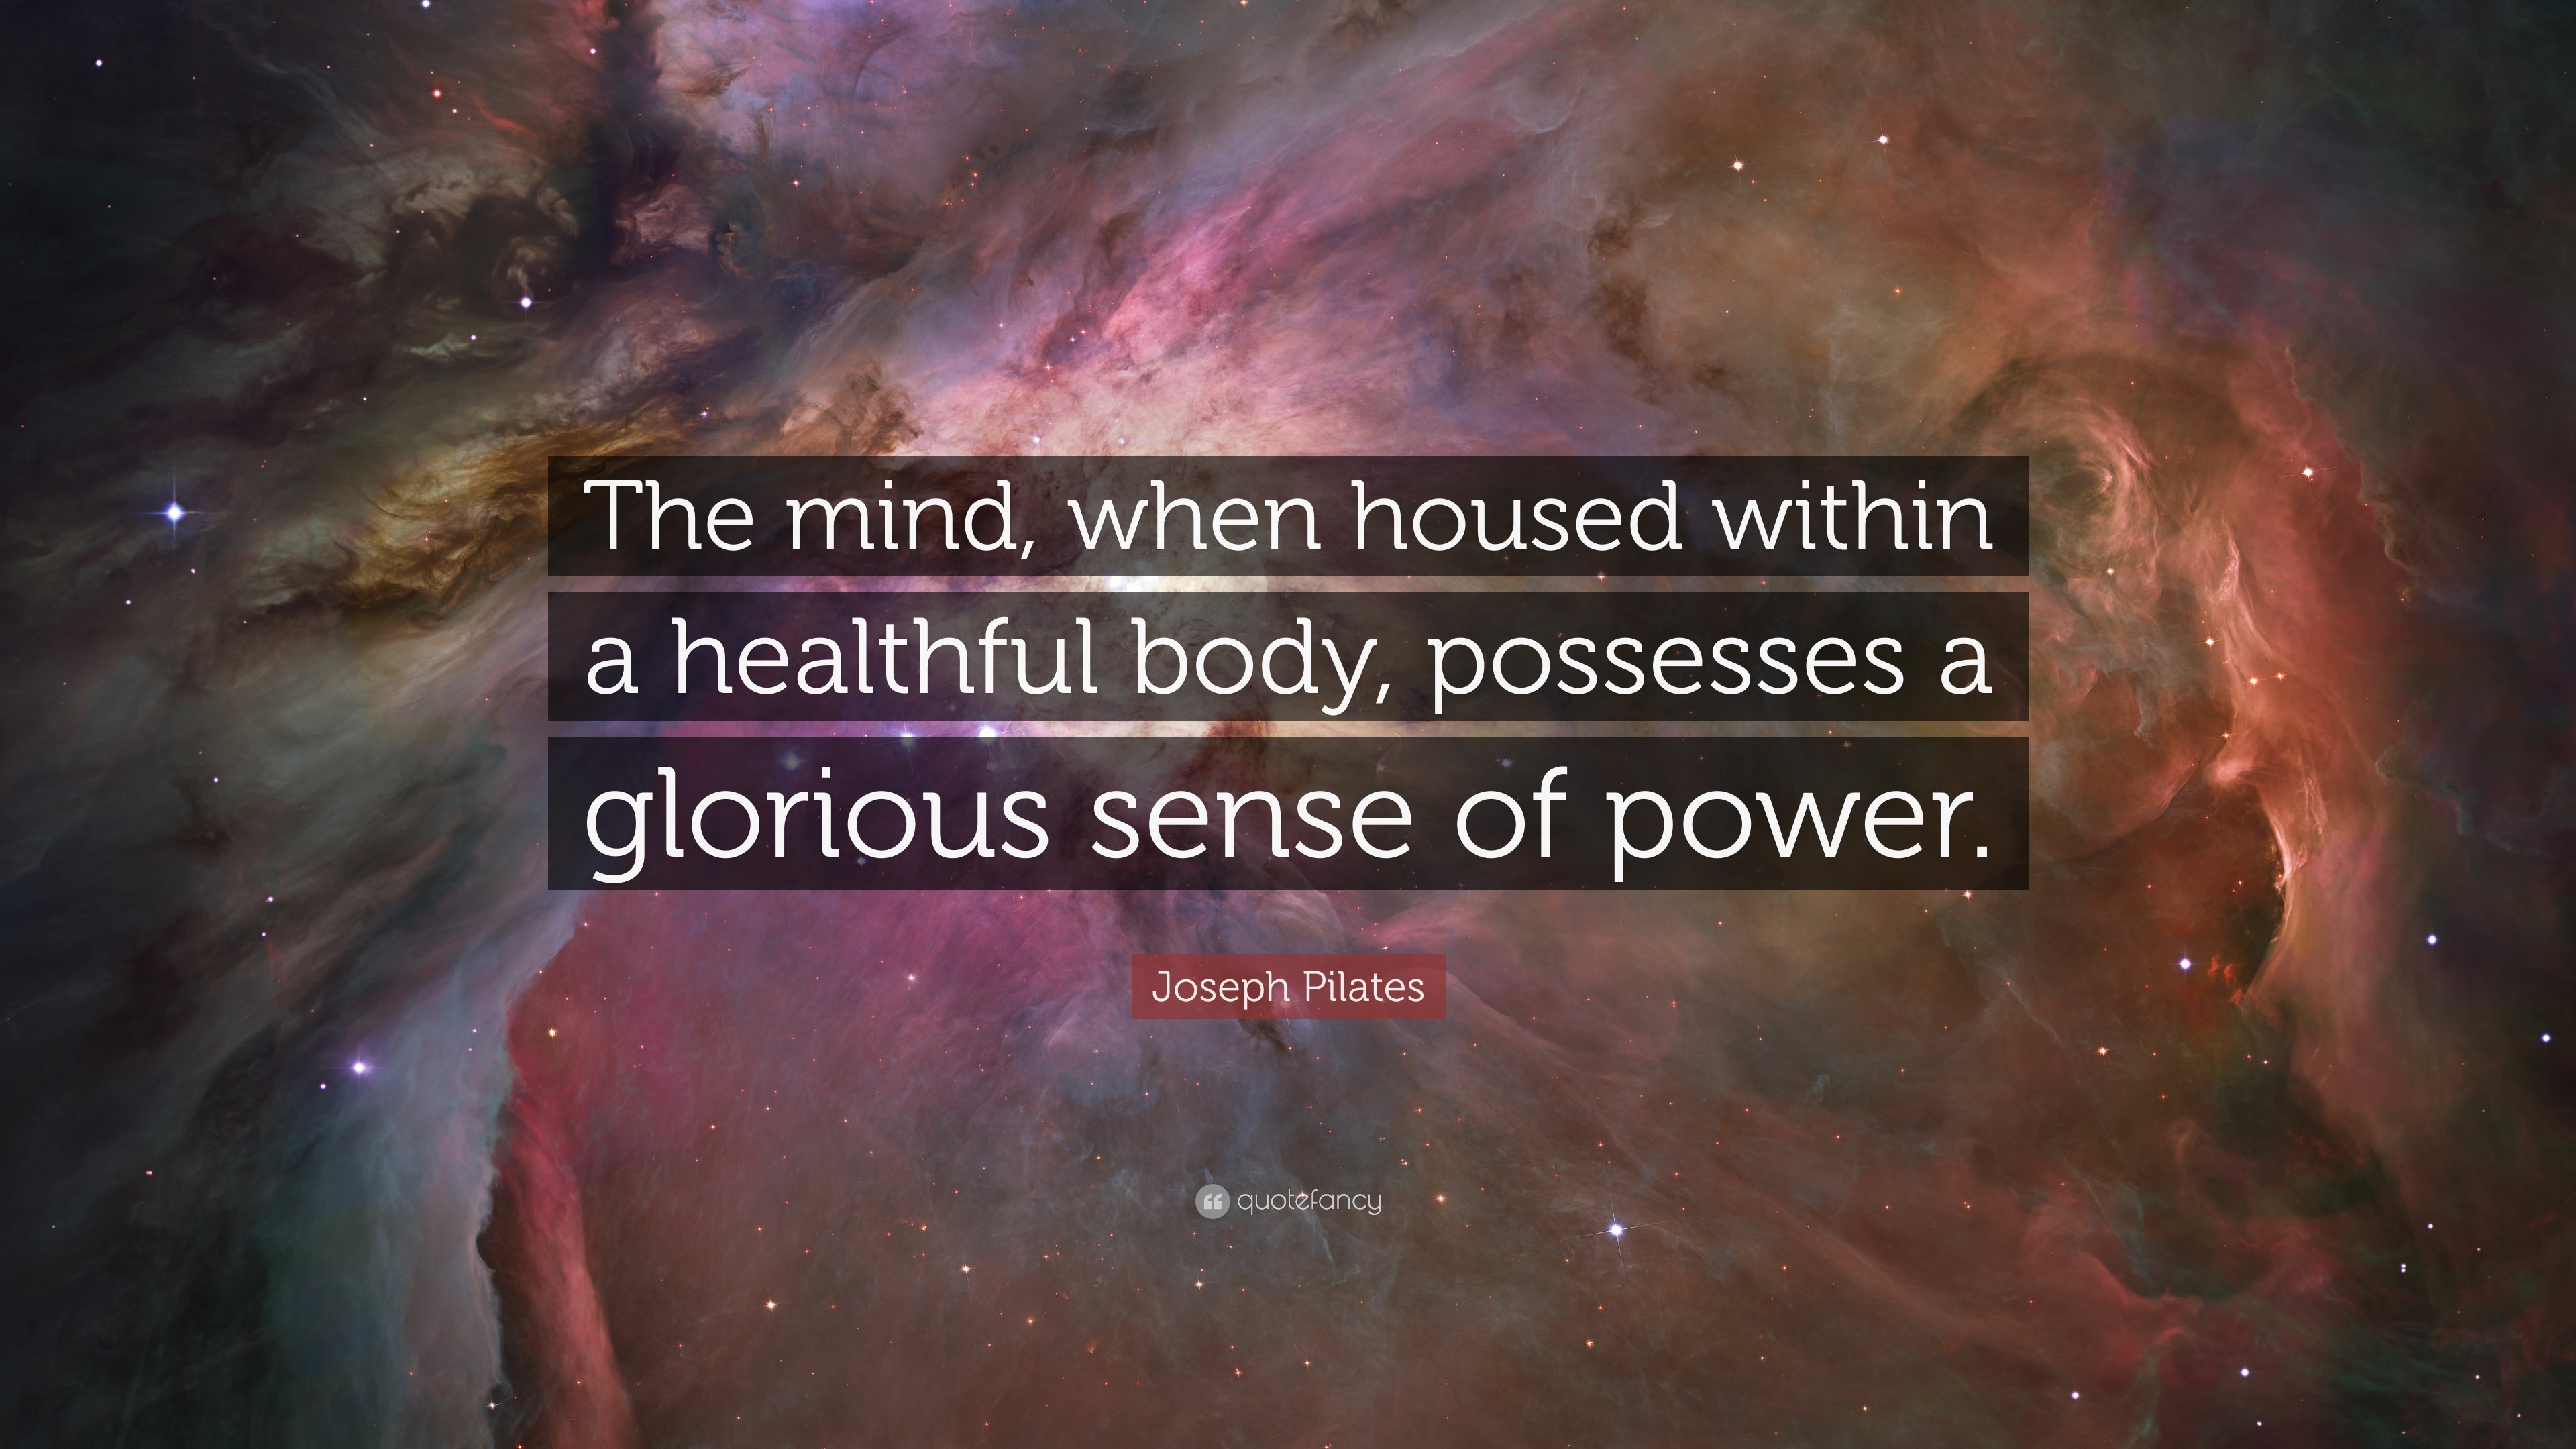 Joseph Pilates Quote: “The mind, when housed within a healthful